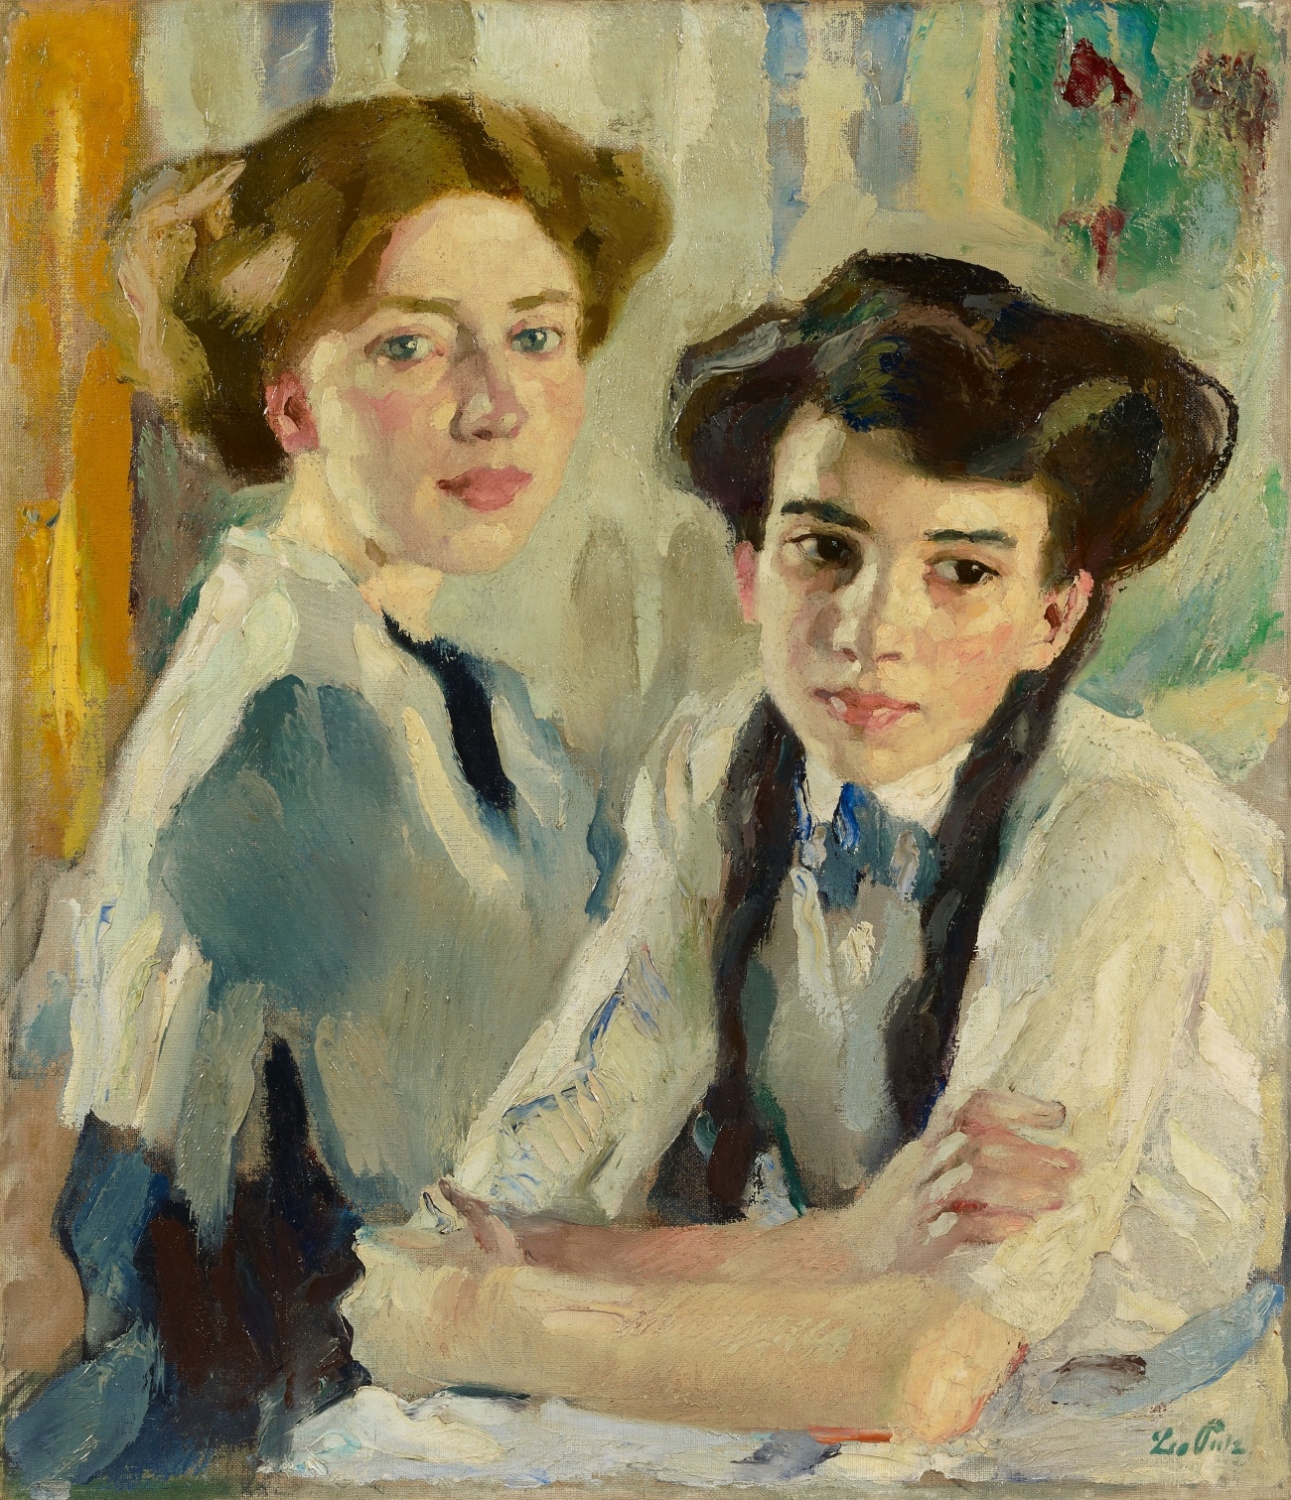 Inspiration: “Blonde and Brunette,” by Leo Putz